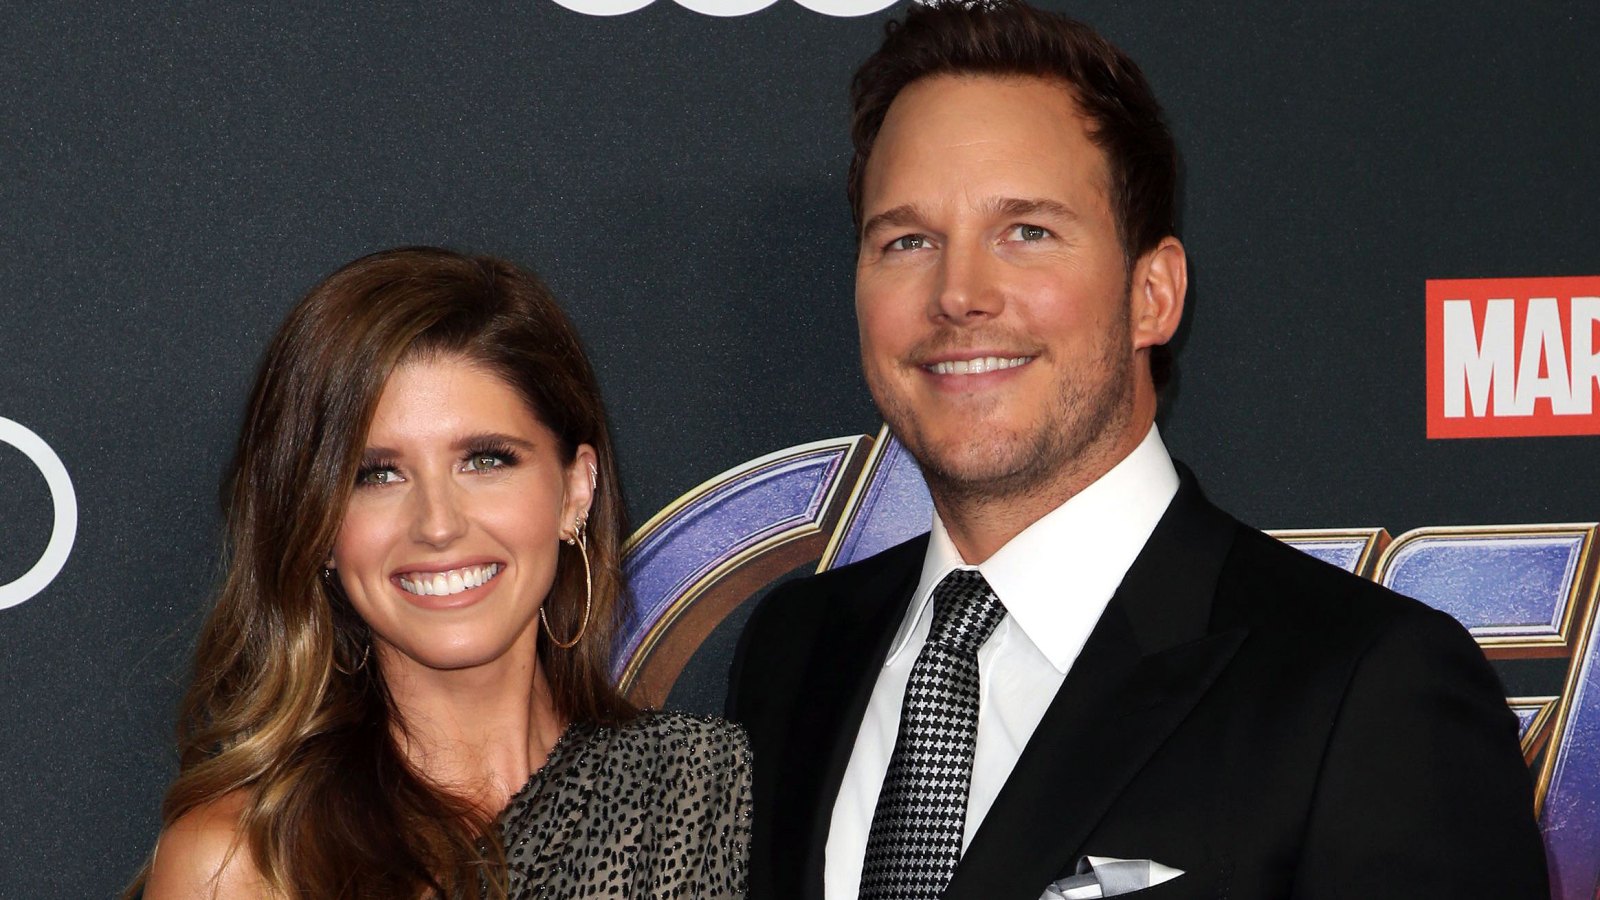 Chris Pratt and Katherine Schwarzenegger Spend First Thanksgiving Together as a Married Couple